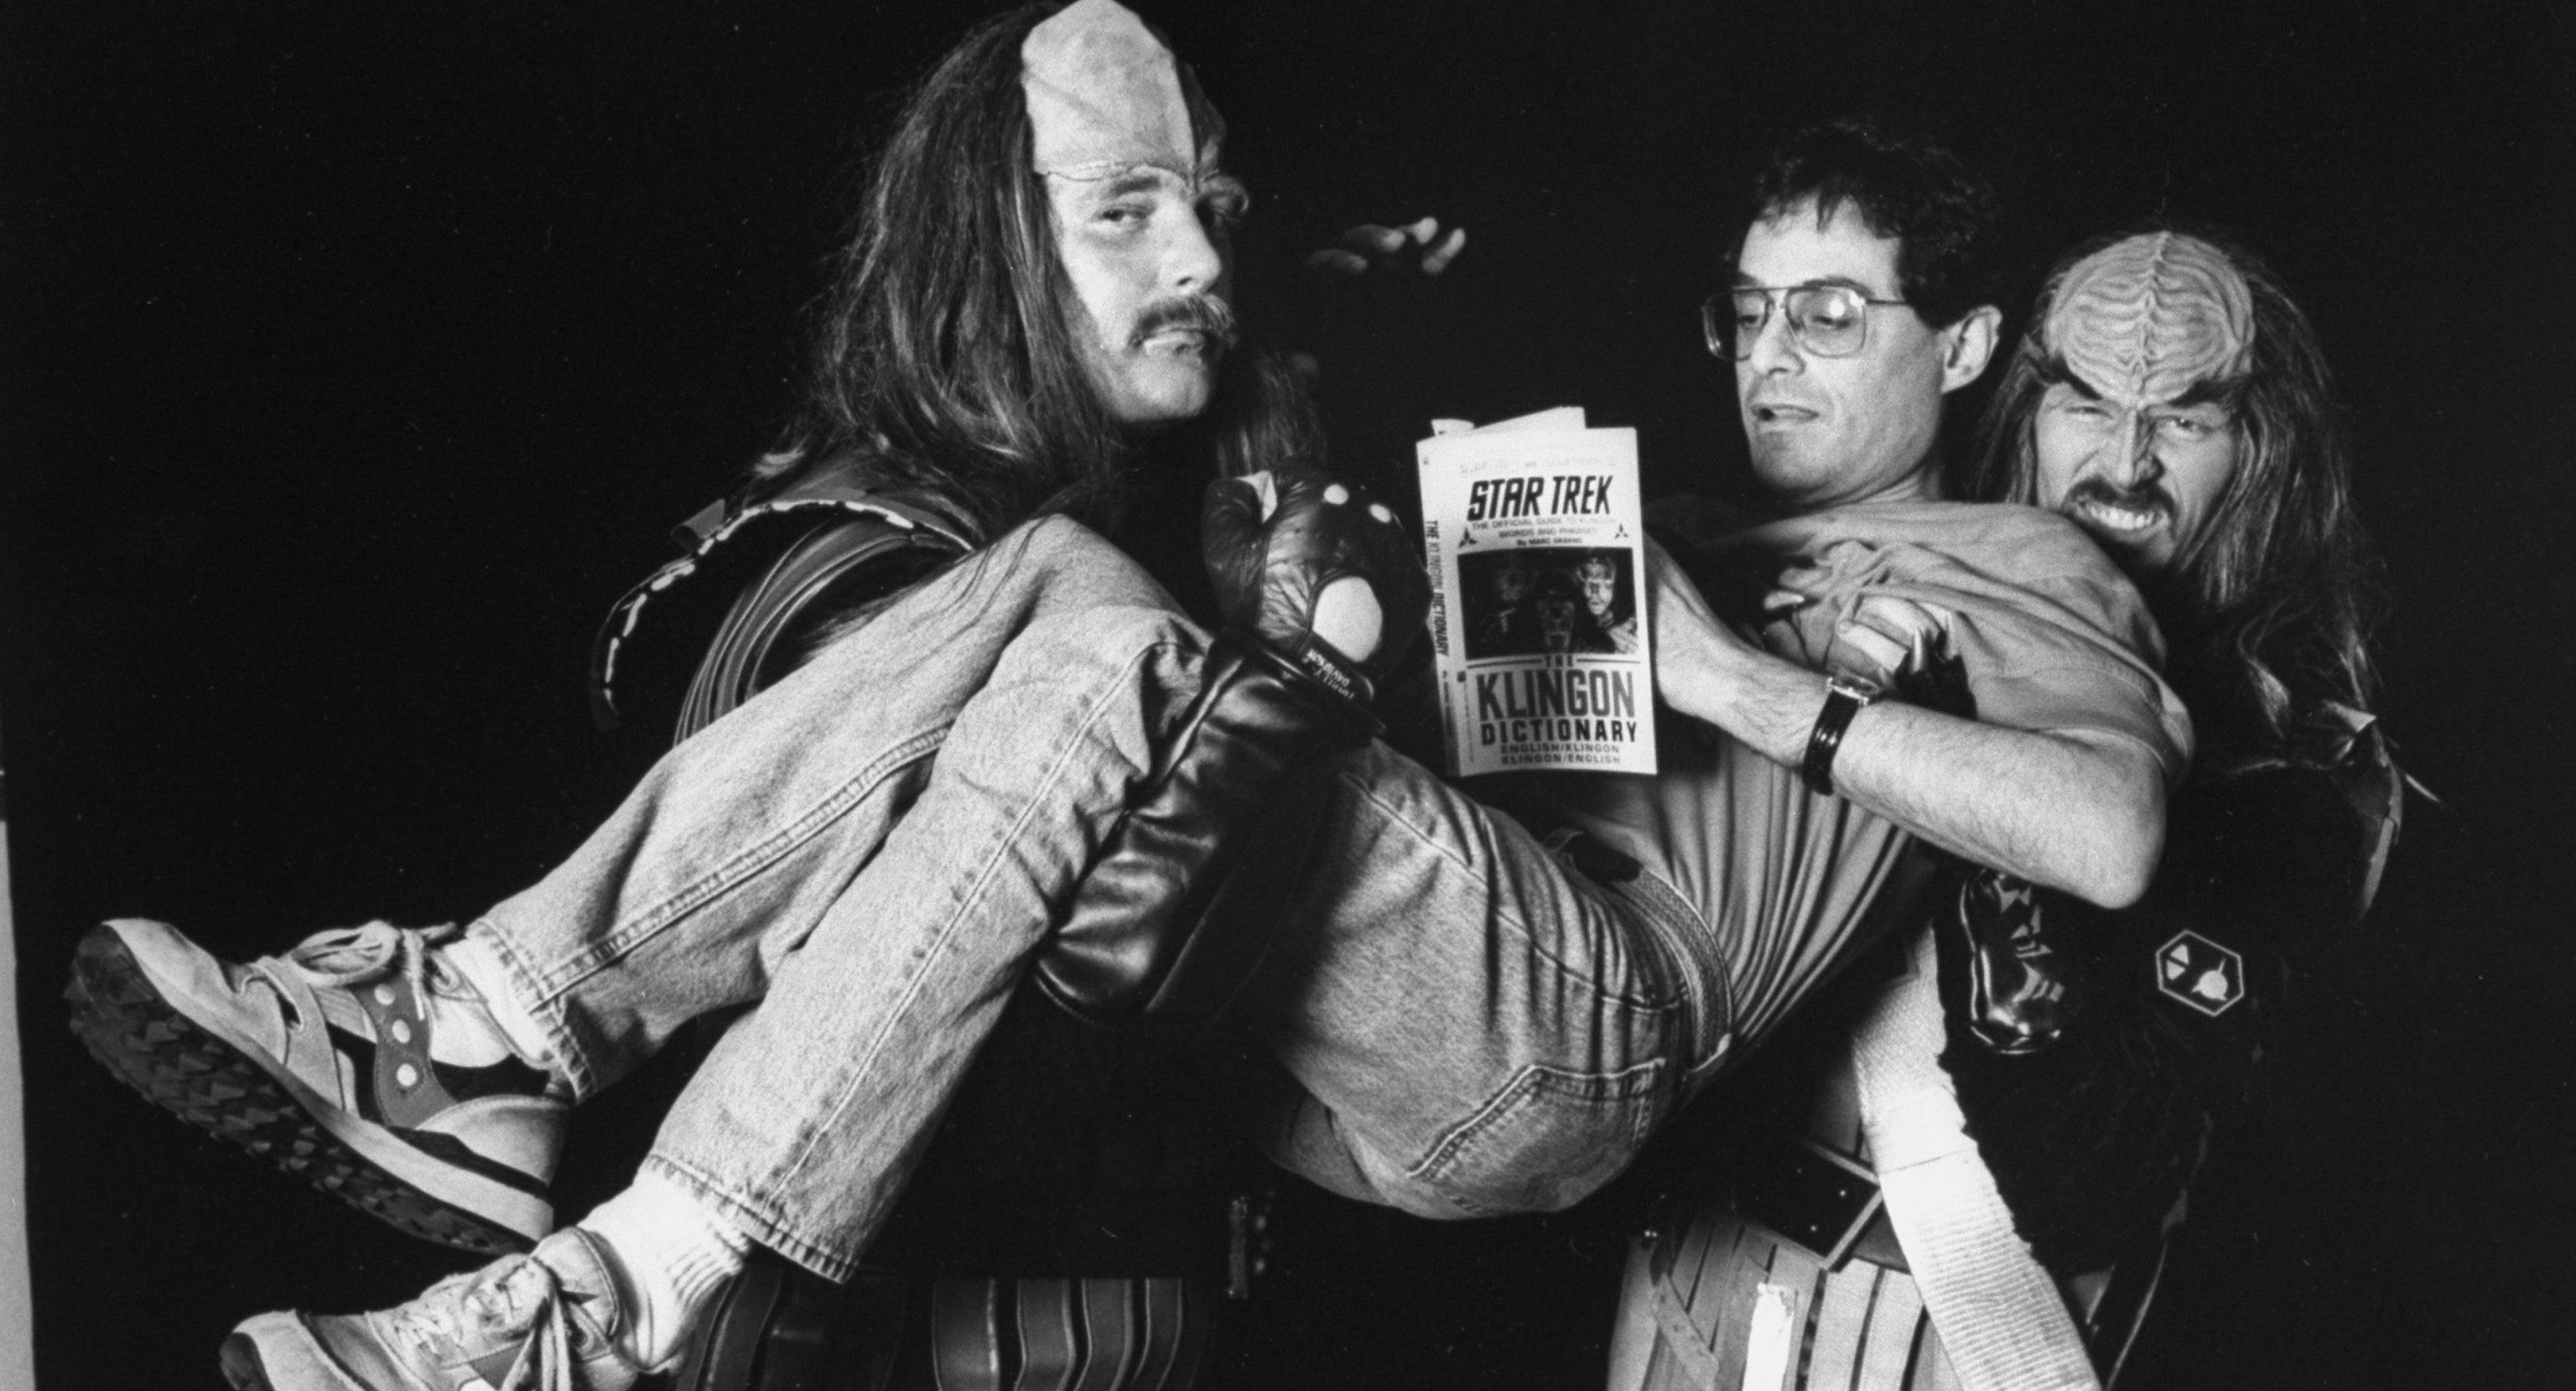 Two men in Klingon makeup and costume lift up Marc Okrand as he flips through his book 'The Klingon Dictionary'